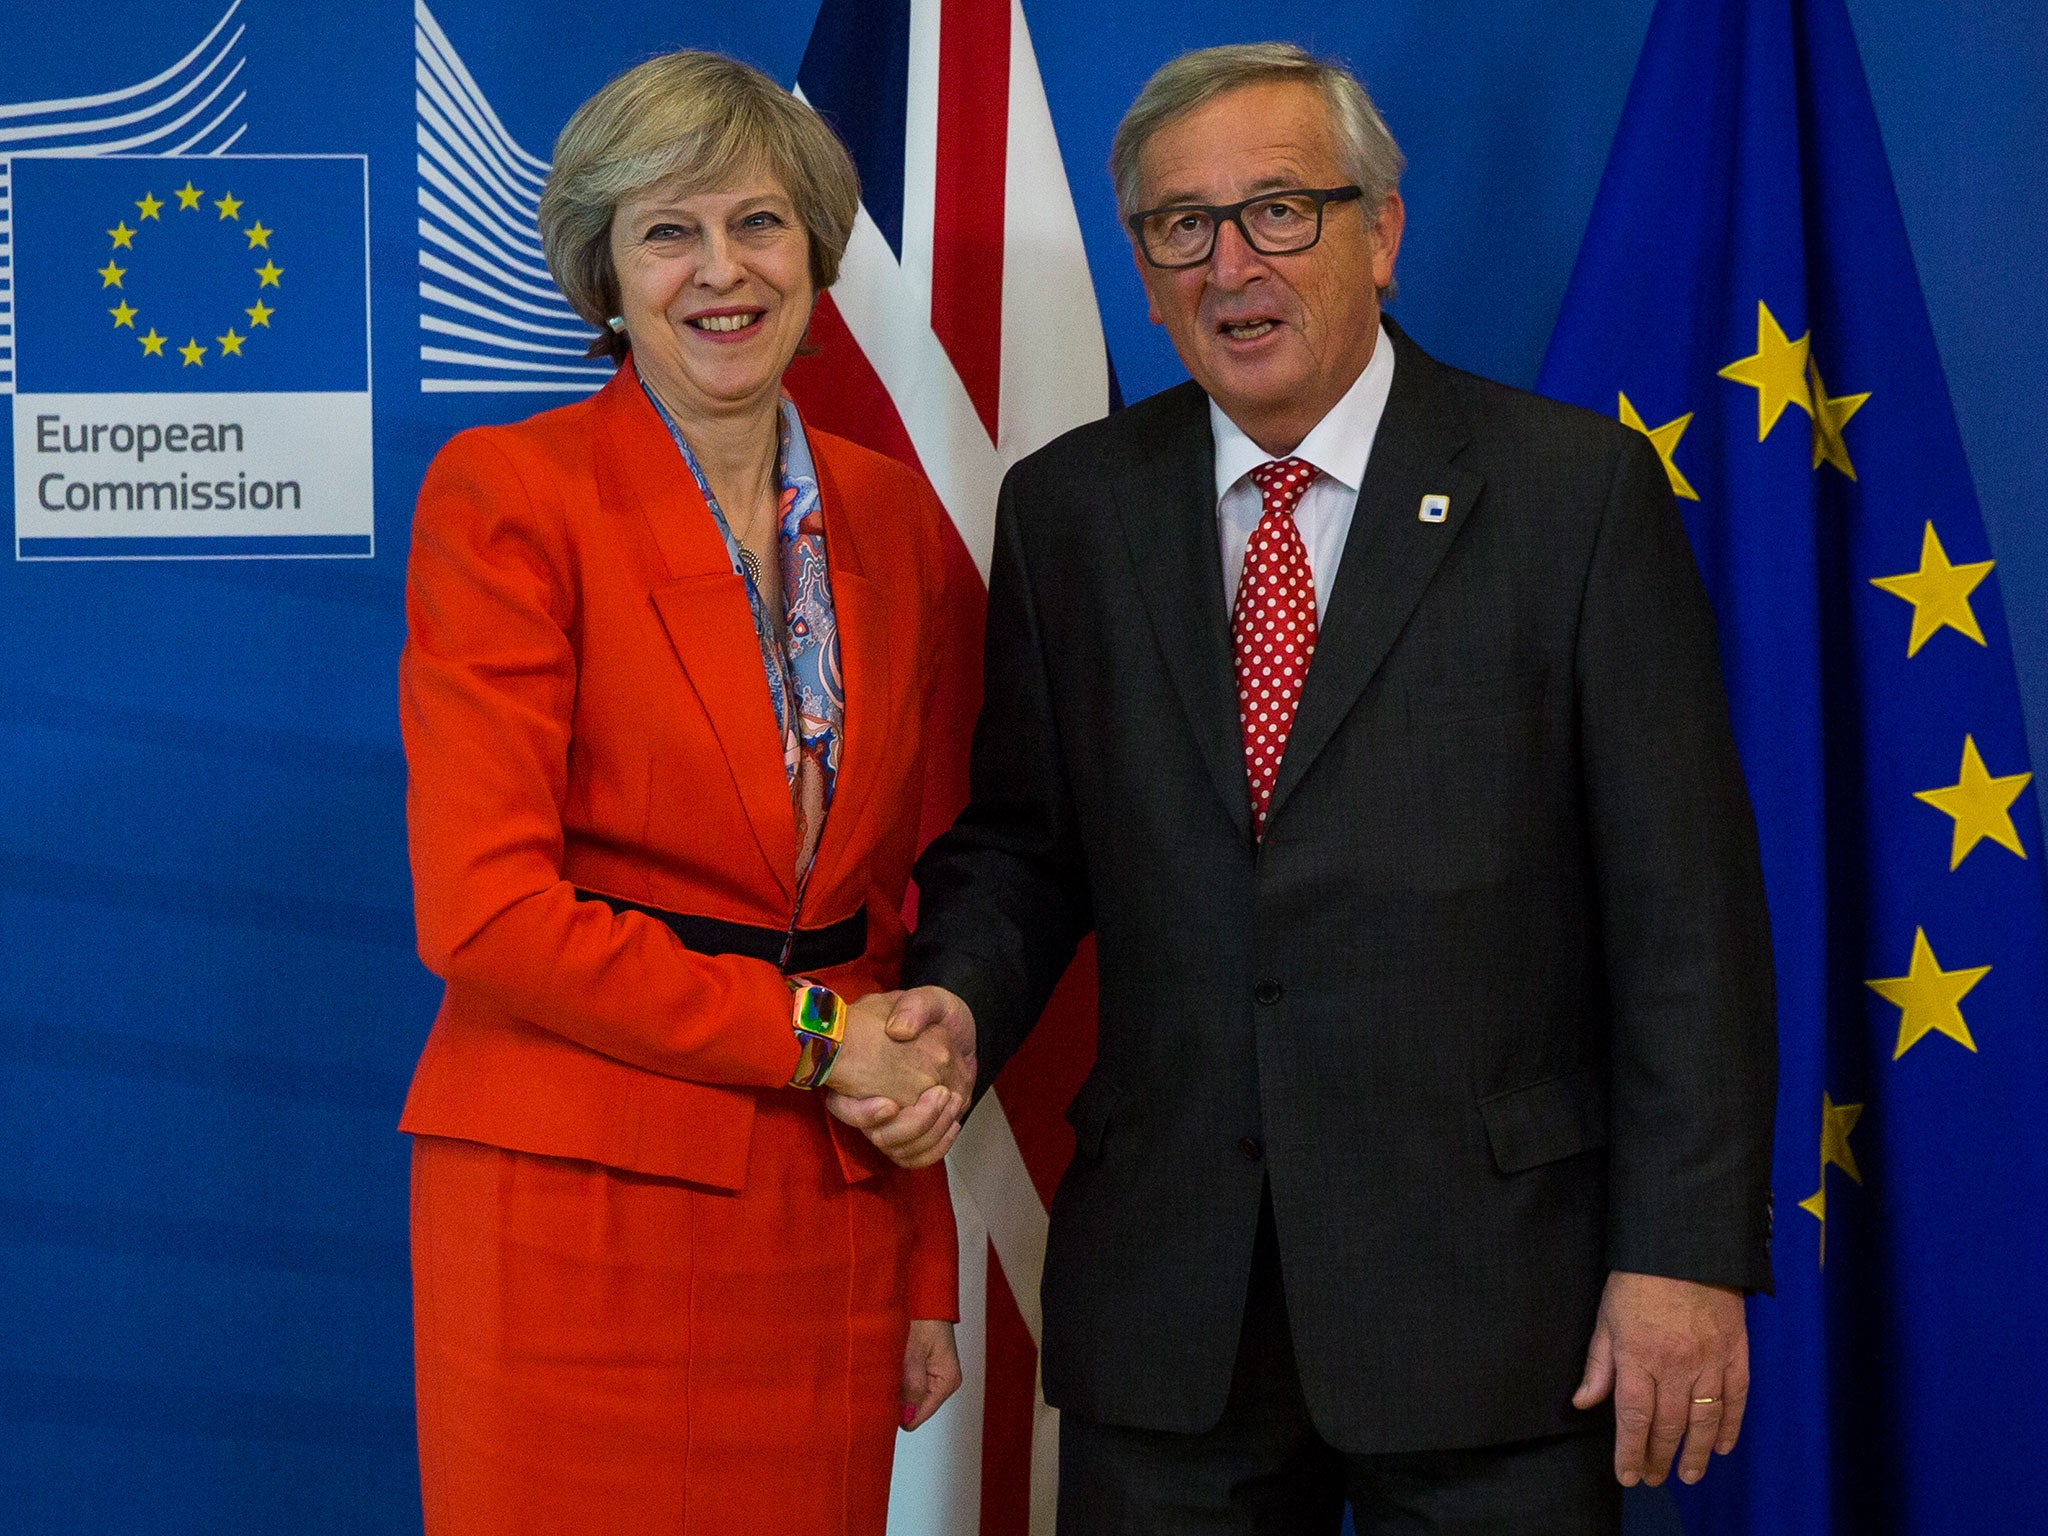 Jean-Claude Juncker is the President of the European Commission, the EU's executive body